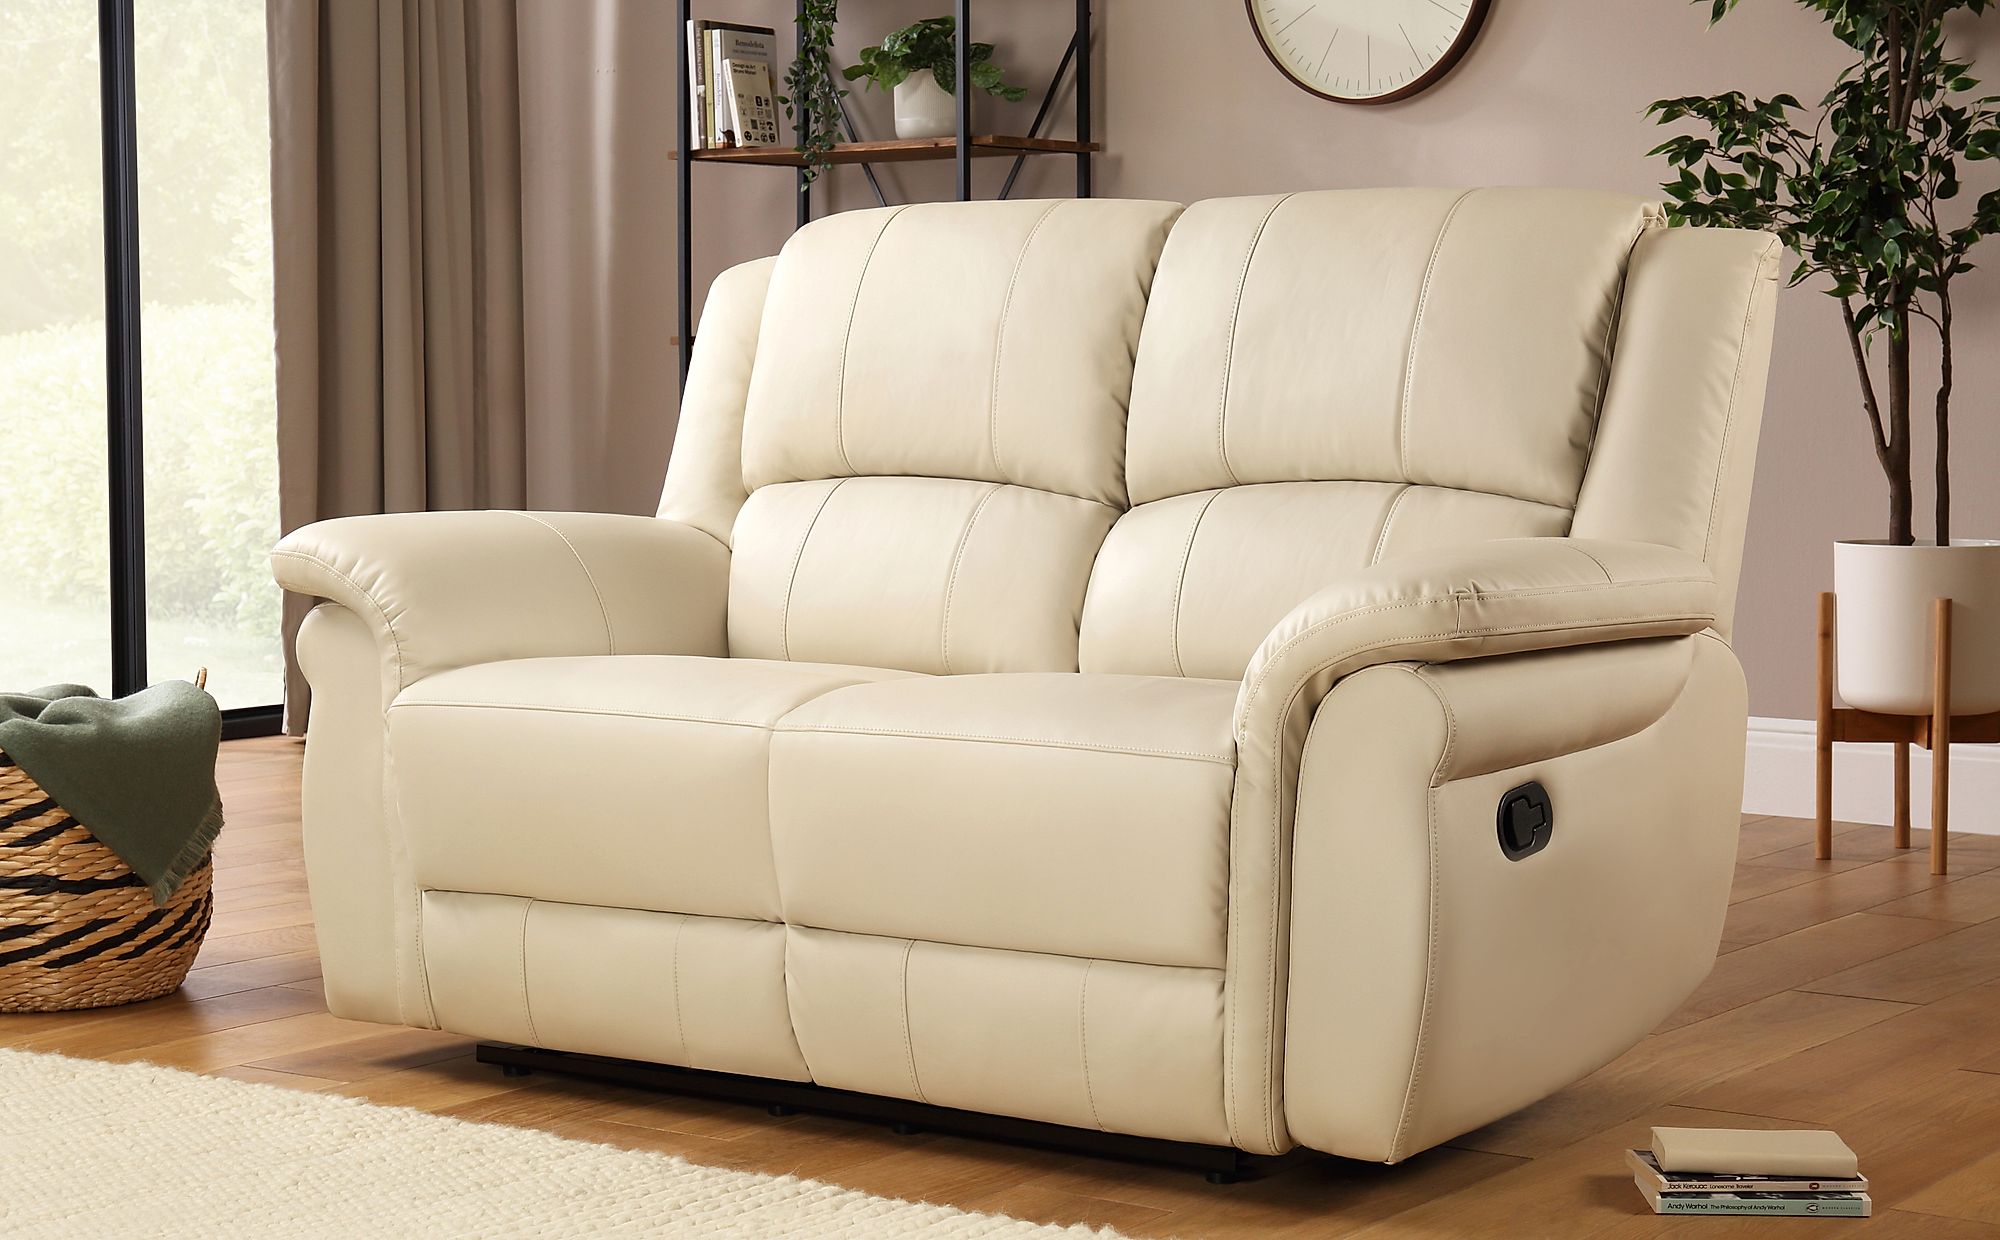 2 seater leather recliner sofa covers